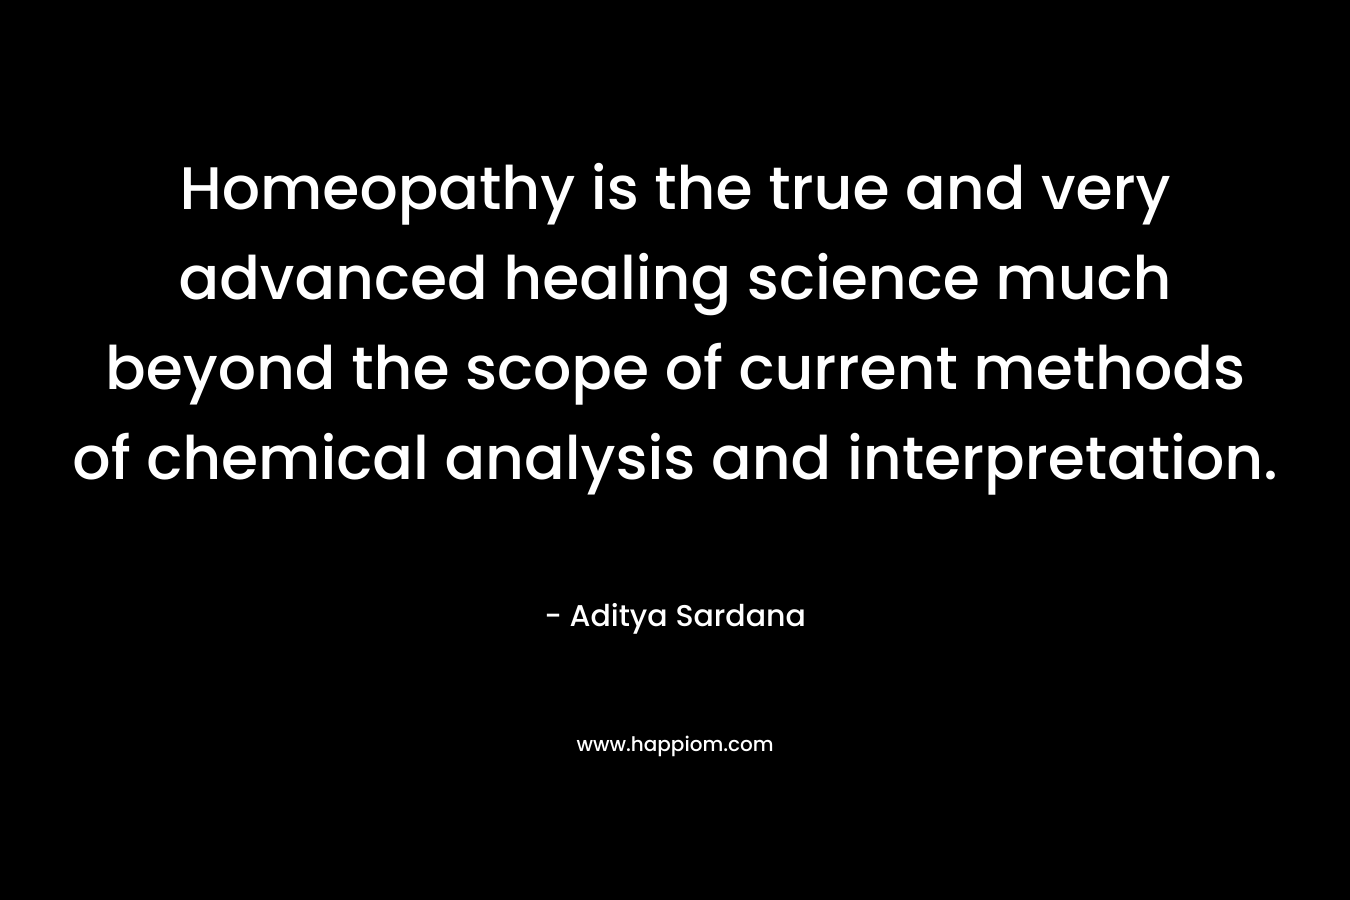 Homeopathy is the true and very advanced healing science much beyond the scope of current methods of chemical analysis and interpretation. – Aditya Sardana